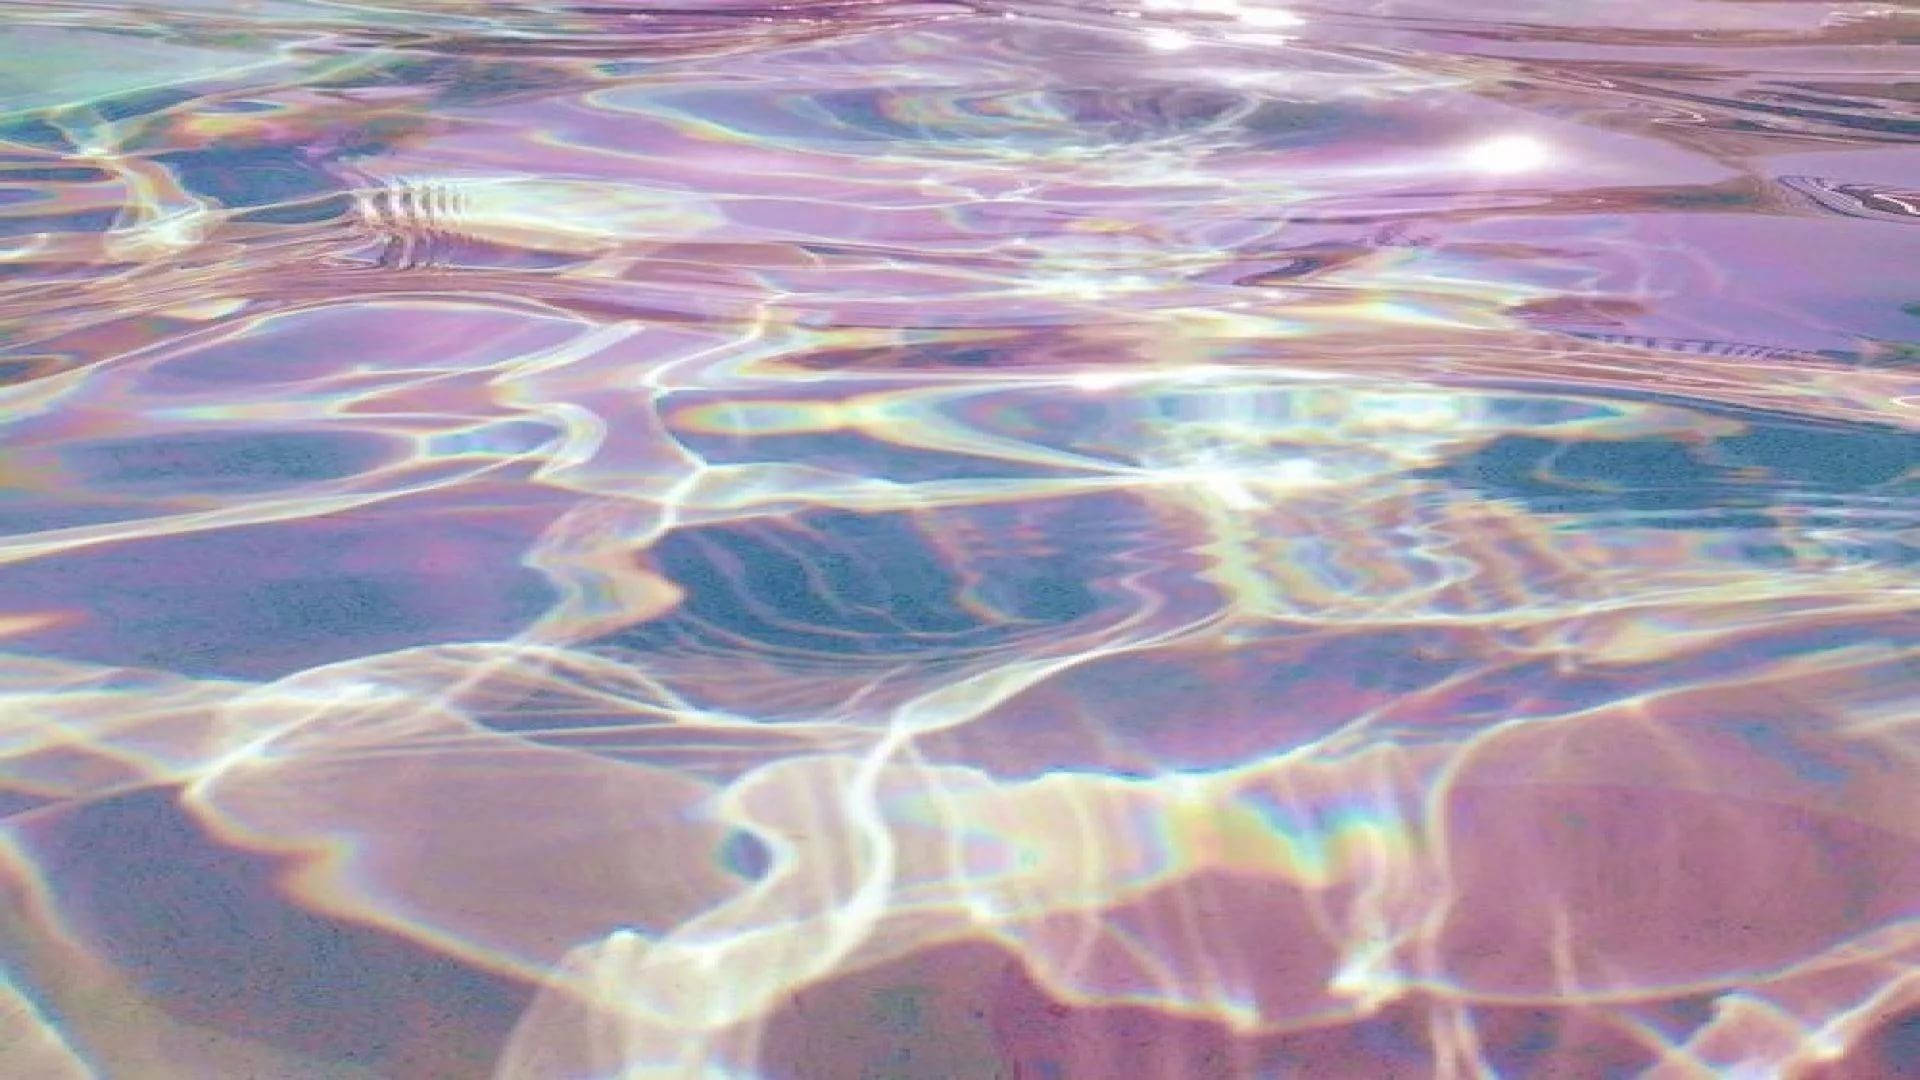 Pink And Blue Water Wallpaper